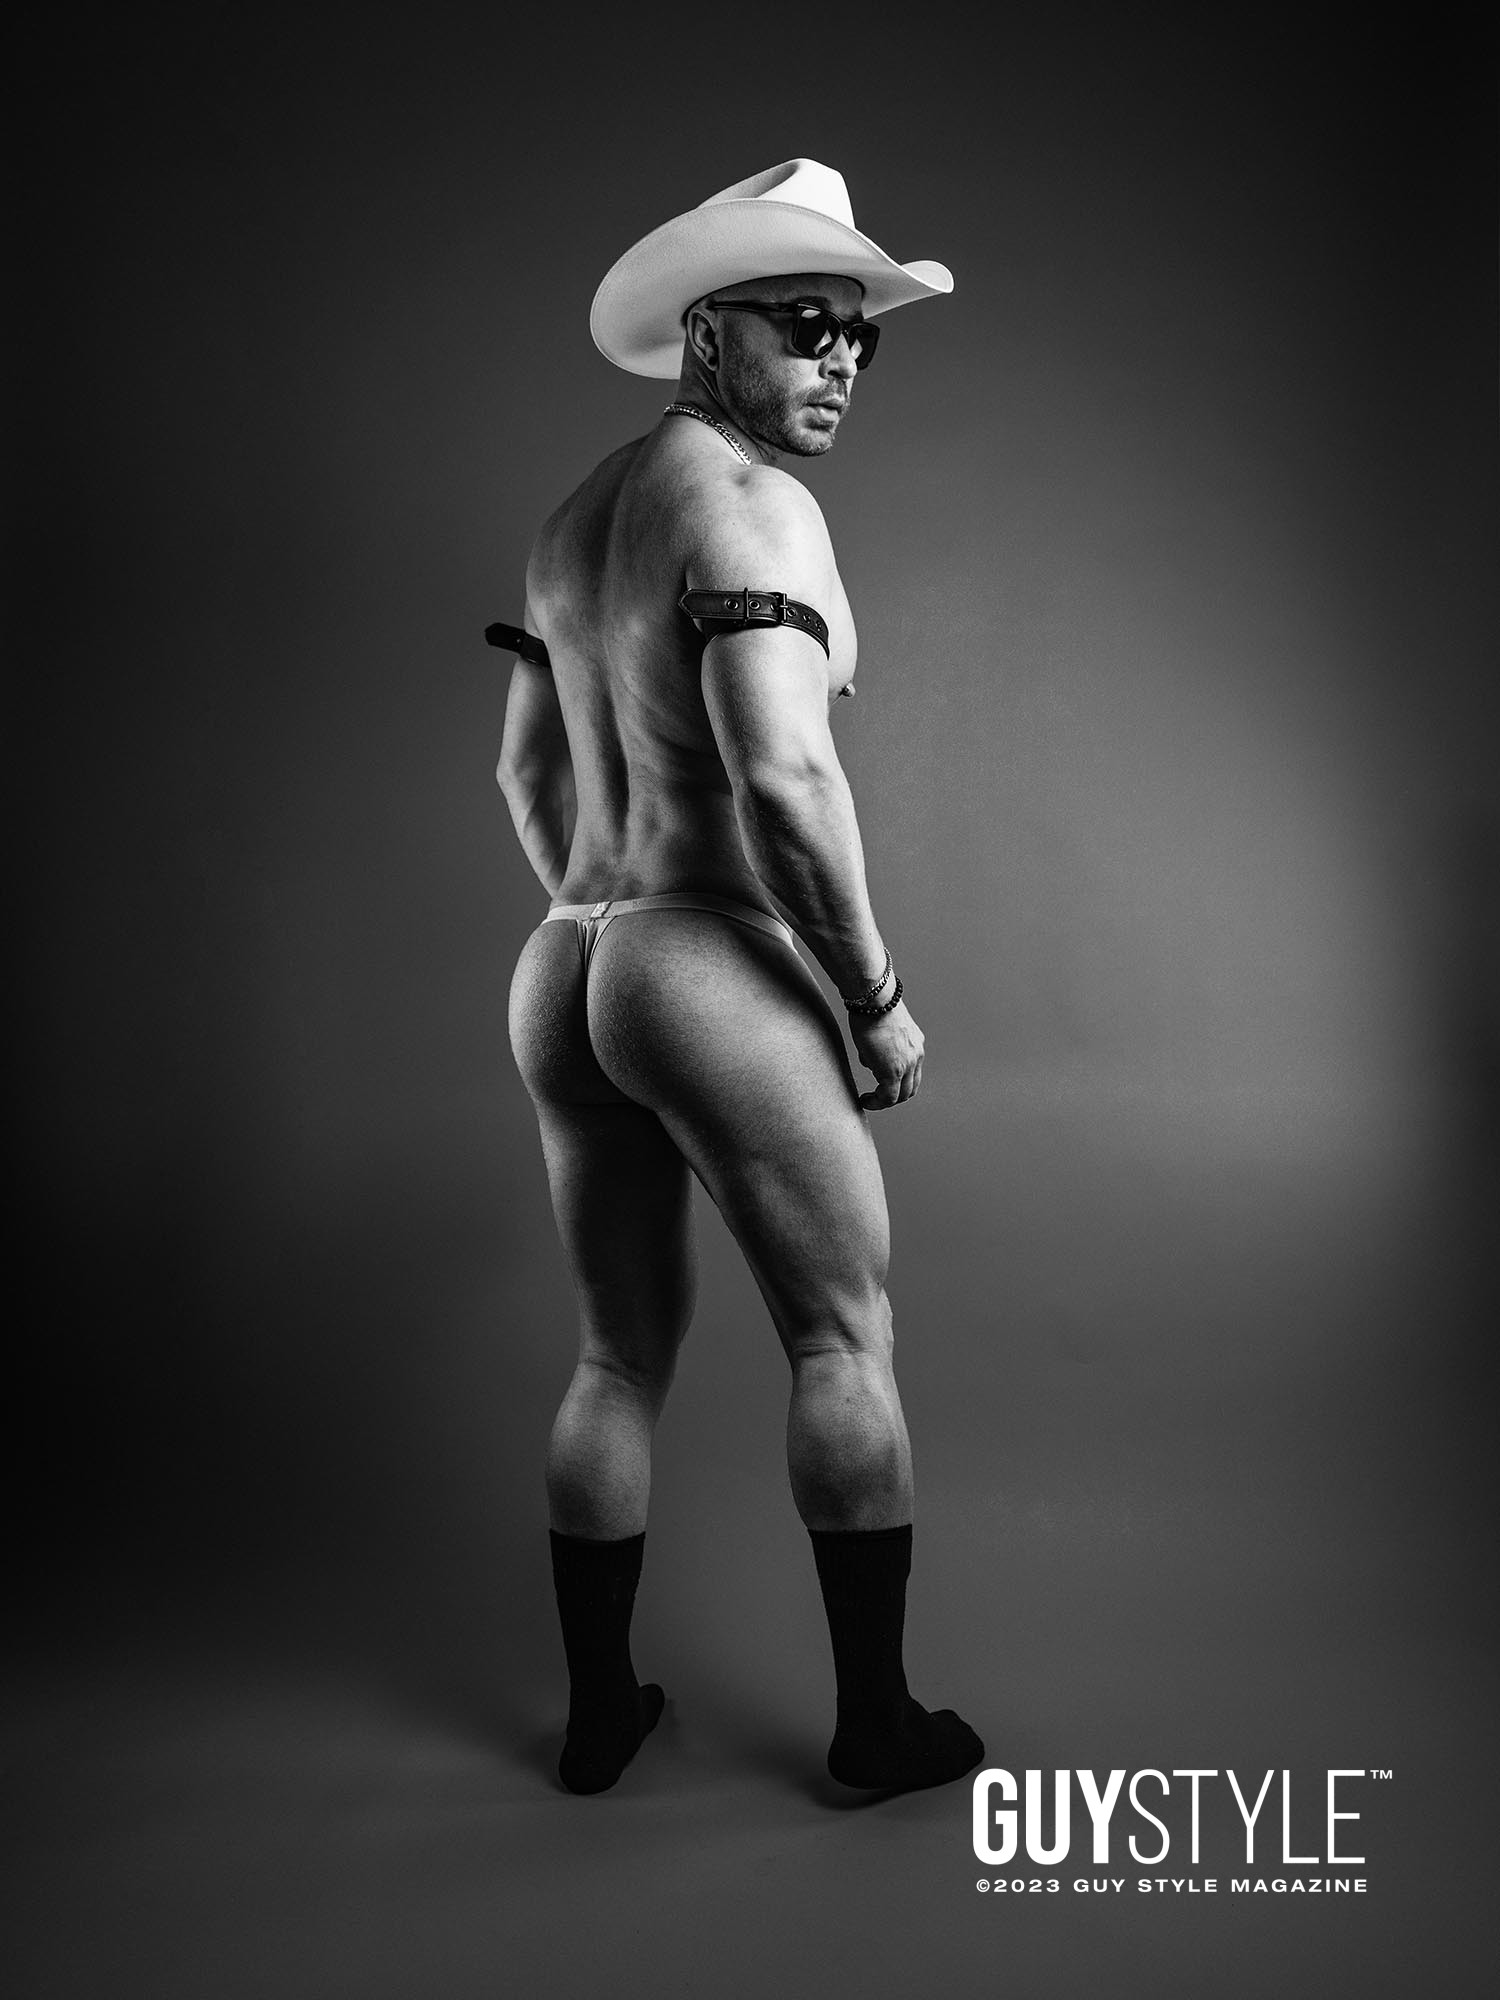 Teal Temptation – NYC Male Boudoir Experience Photoshoot Starring Cocky Cowboy